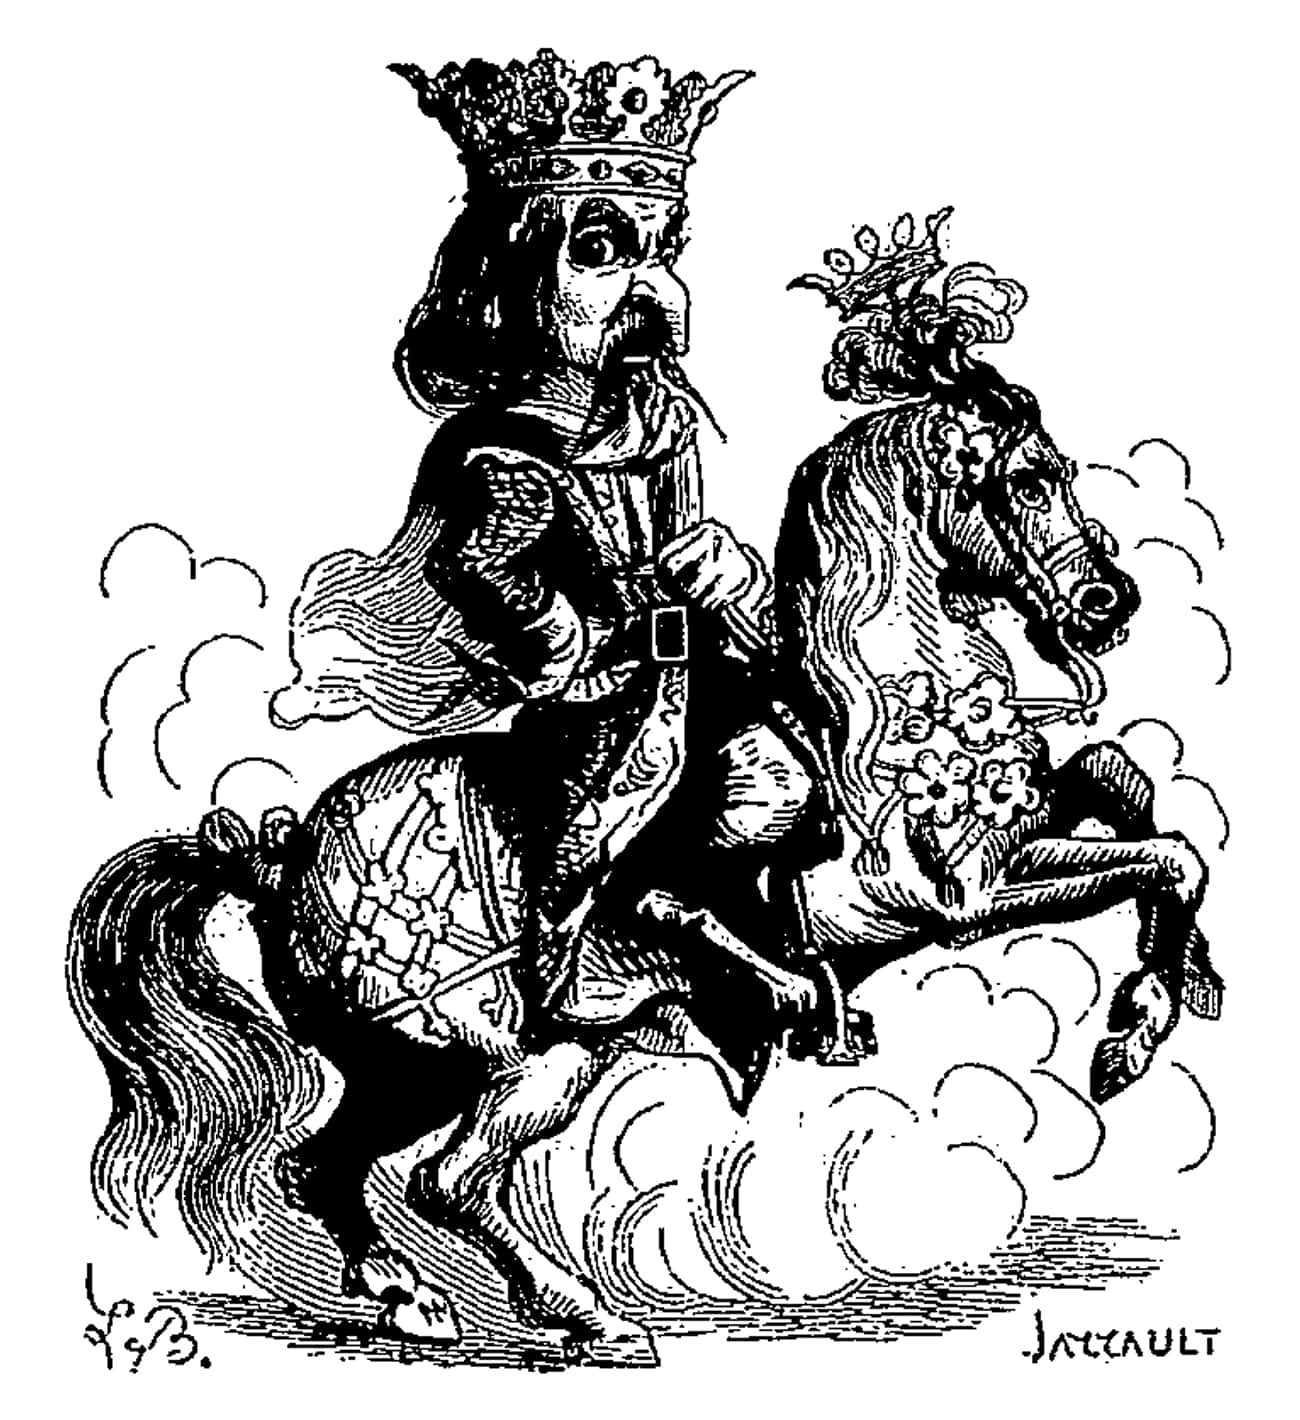 He Appears As A Crowned Soldier On A Horse